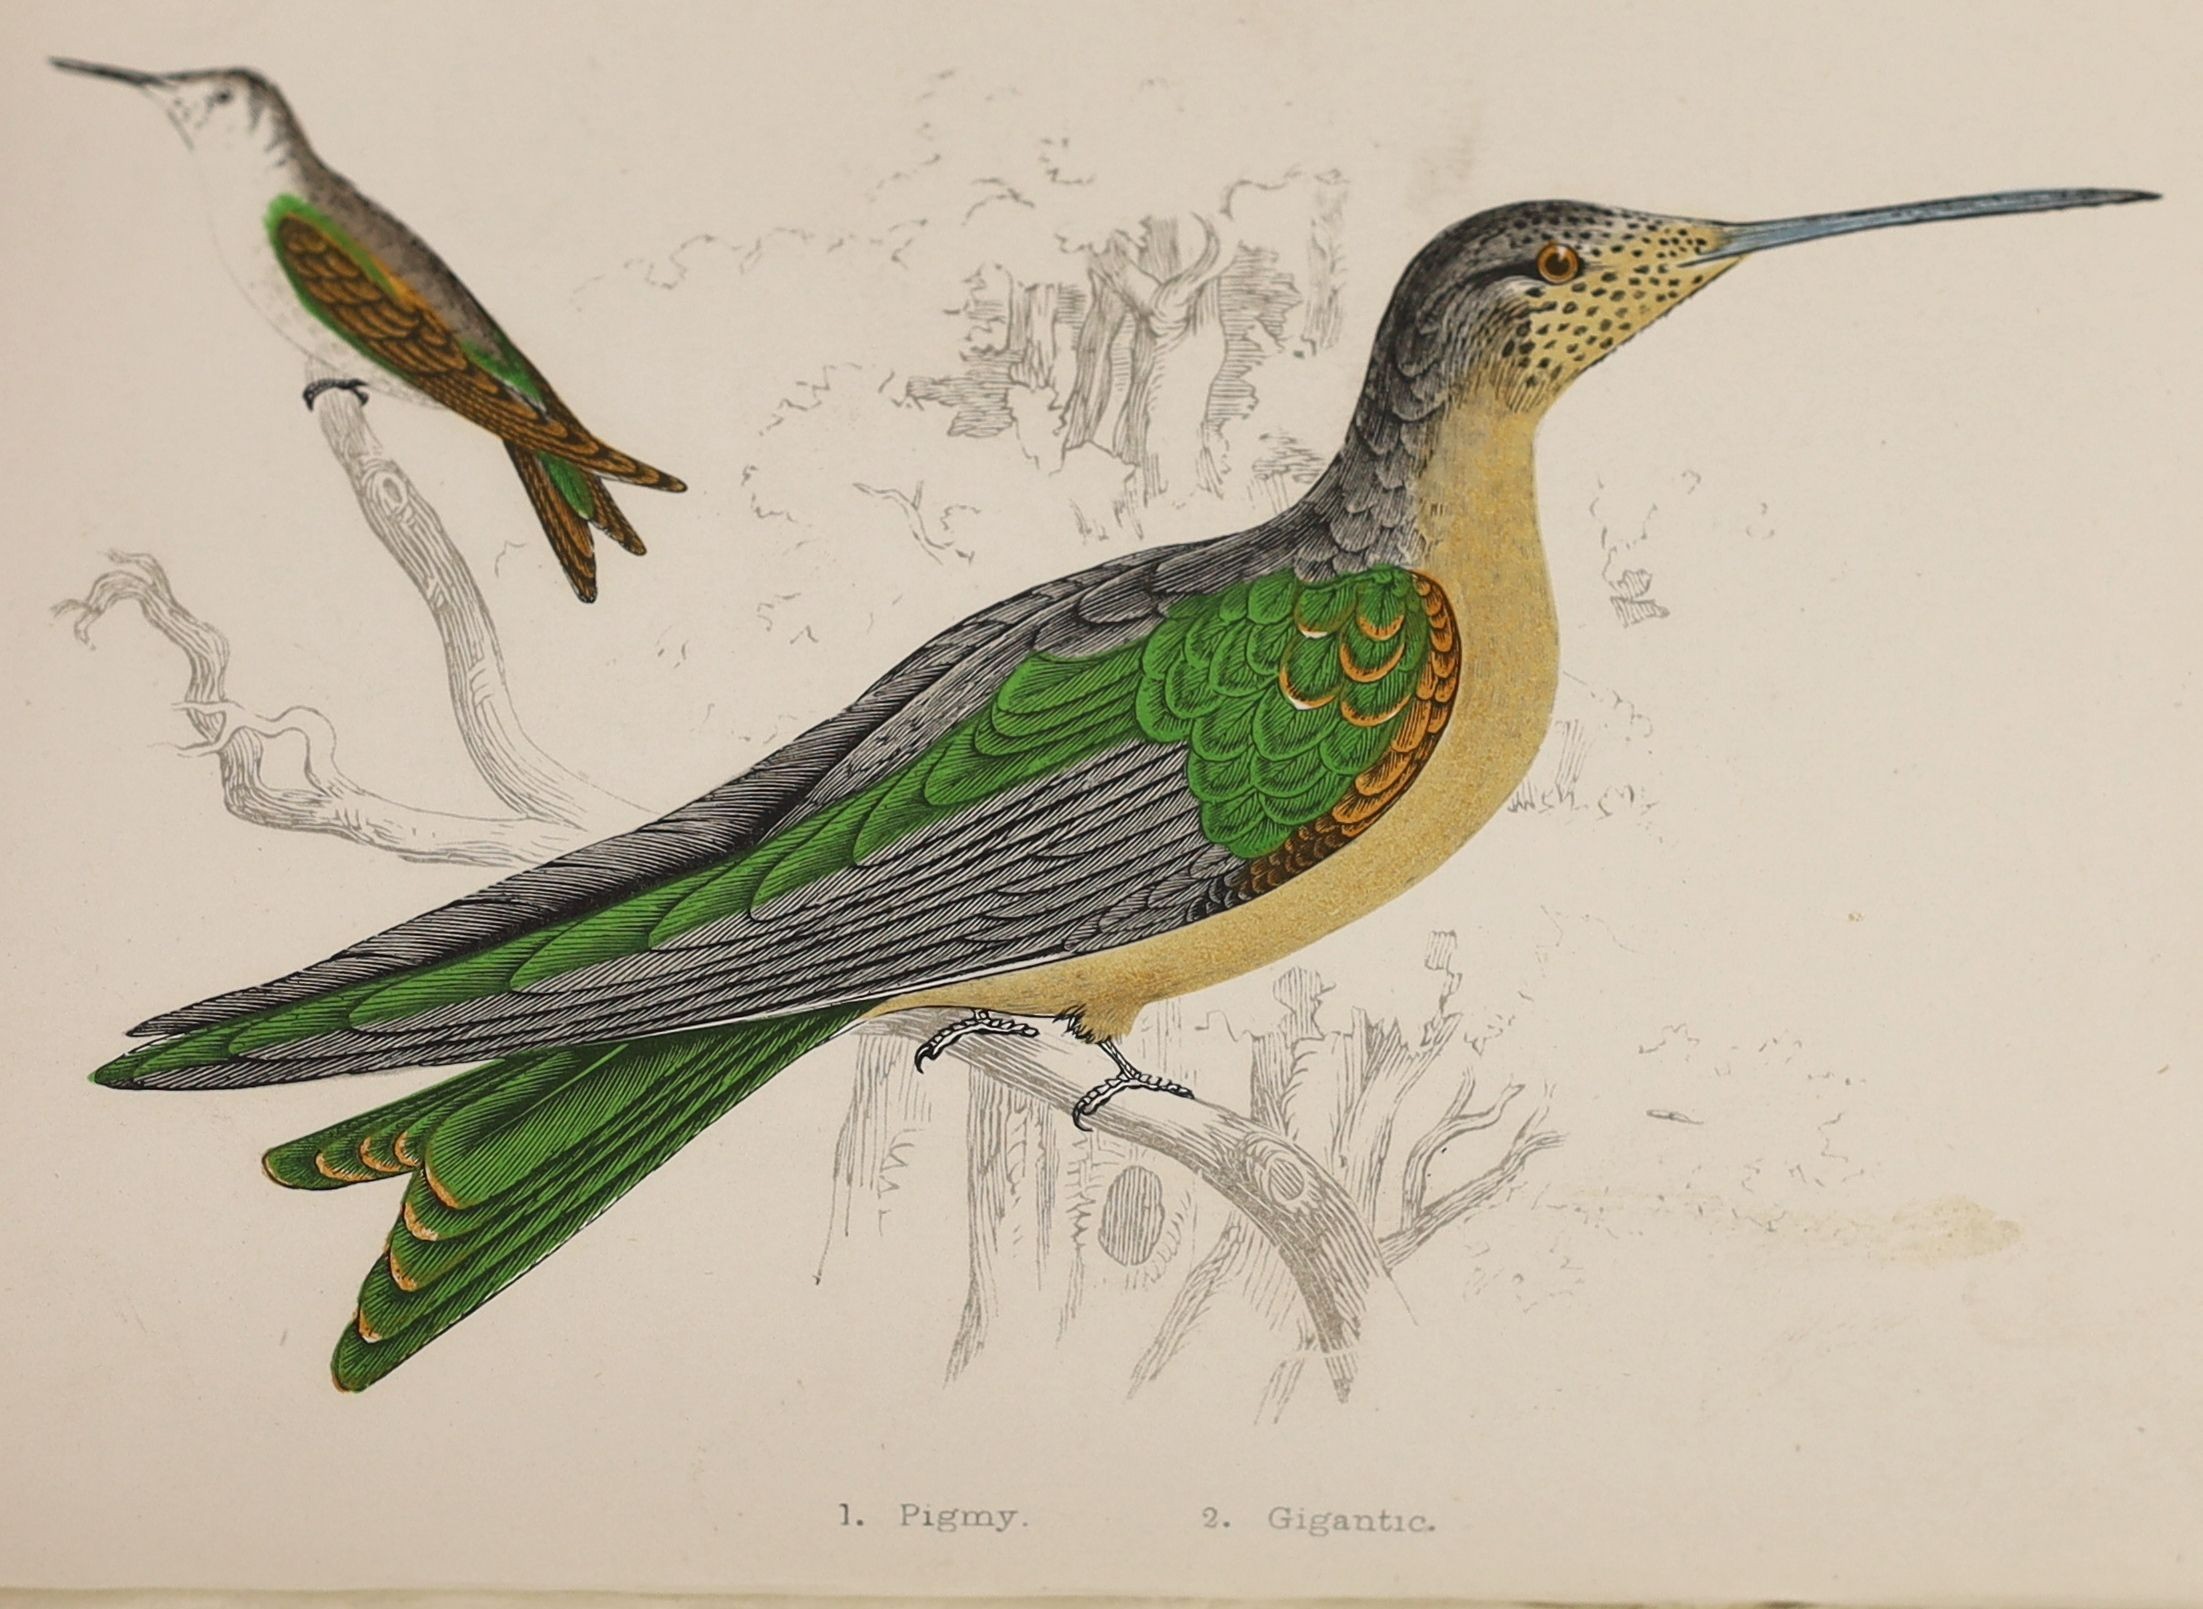 Adams, Henry Gardiner - Humming Birds, Described and Illustrated, 8vo, rebound quarter red morocco, with 8 colour plates, Groombridge and Sons, London [1856] and Higgins, L.G and Riley, N.D - A Field Guide to the Butterf